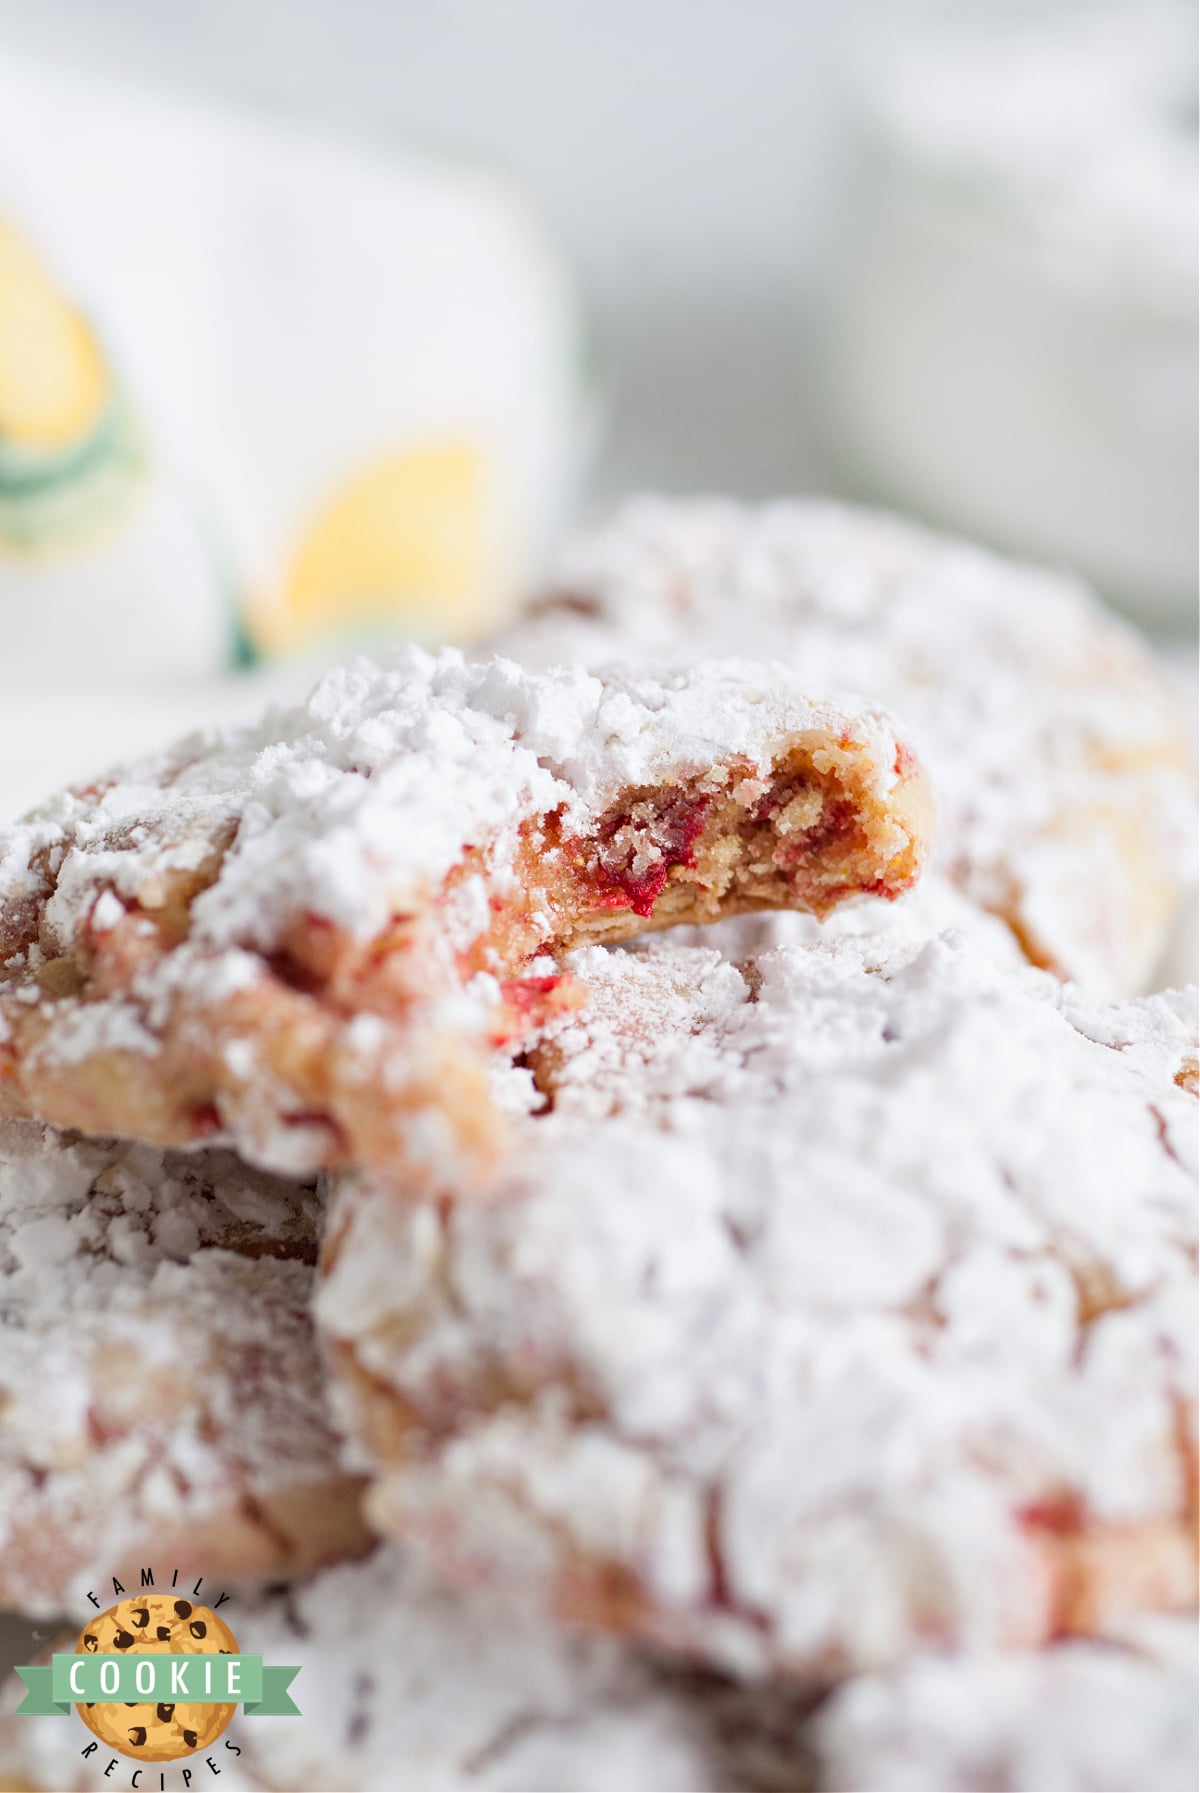 Strawberry Lemonade Cake Mix Cookies made with a lemon cake mix and freeze dried strawberries. Only 5 ingredients to make these soft crinkle cookies that are the perfect balance of tart and sweet.  